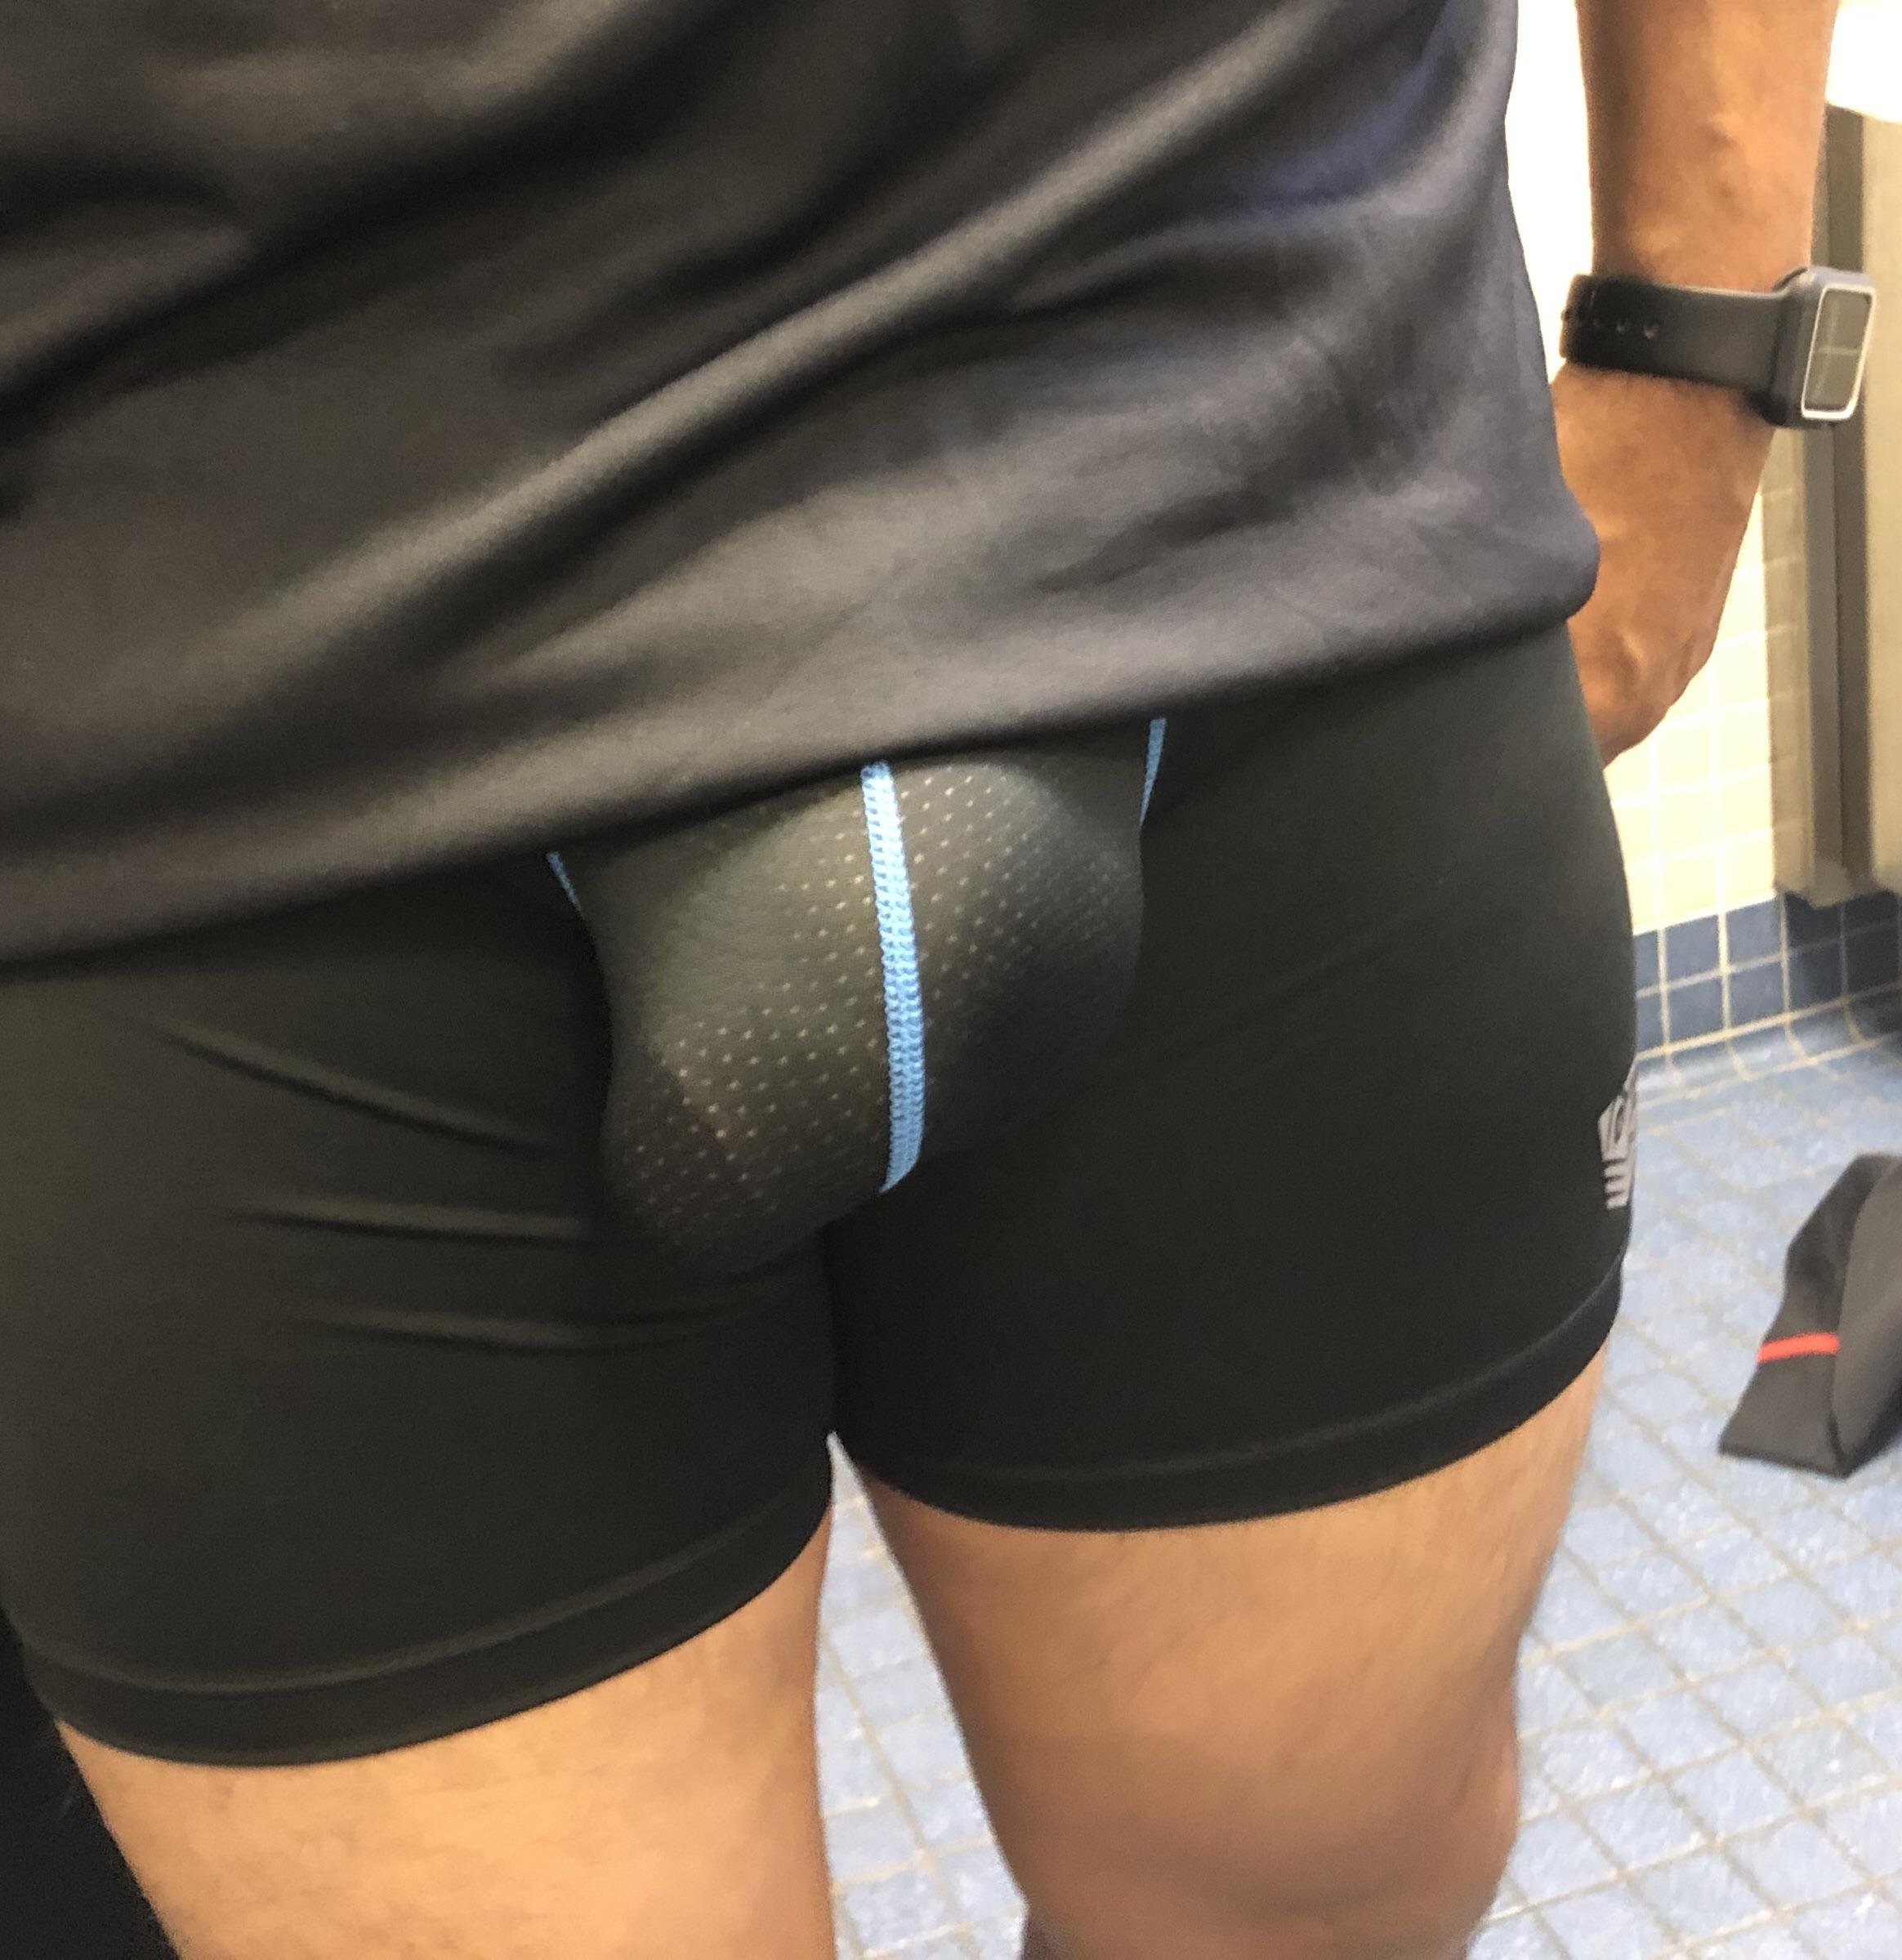 Fort Troff undies. Tight and revealing :)